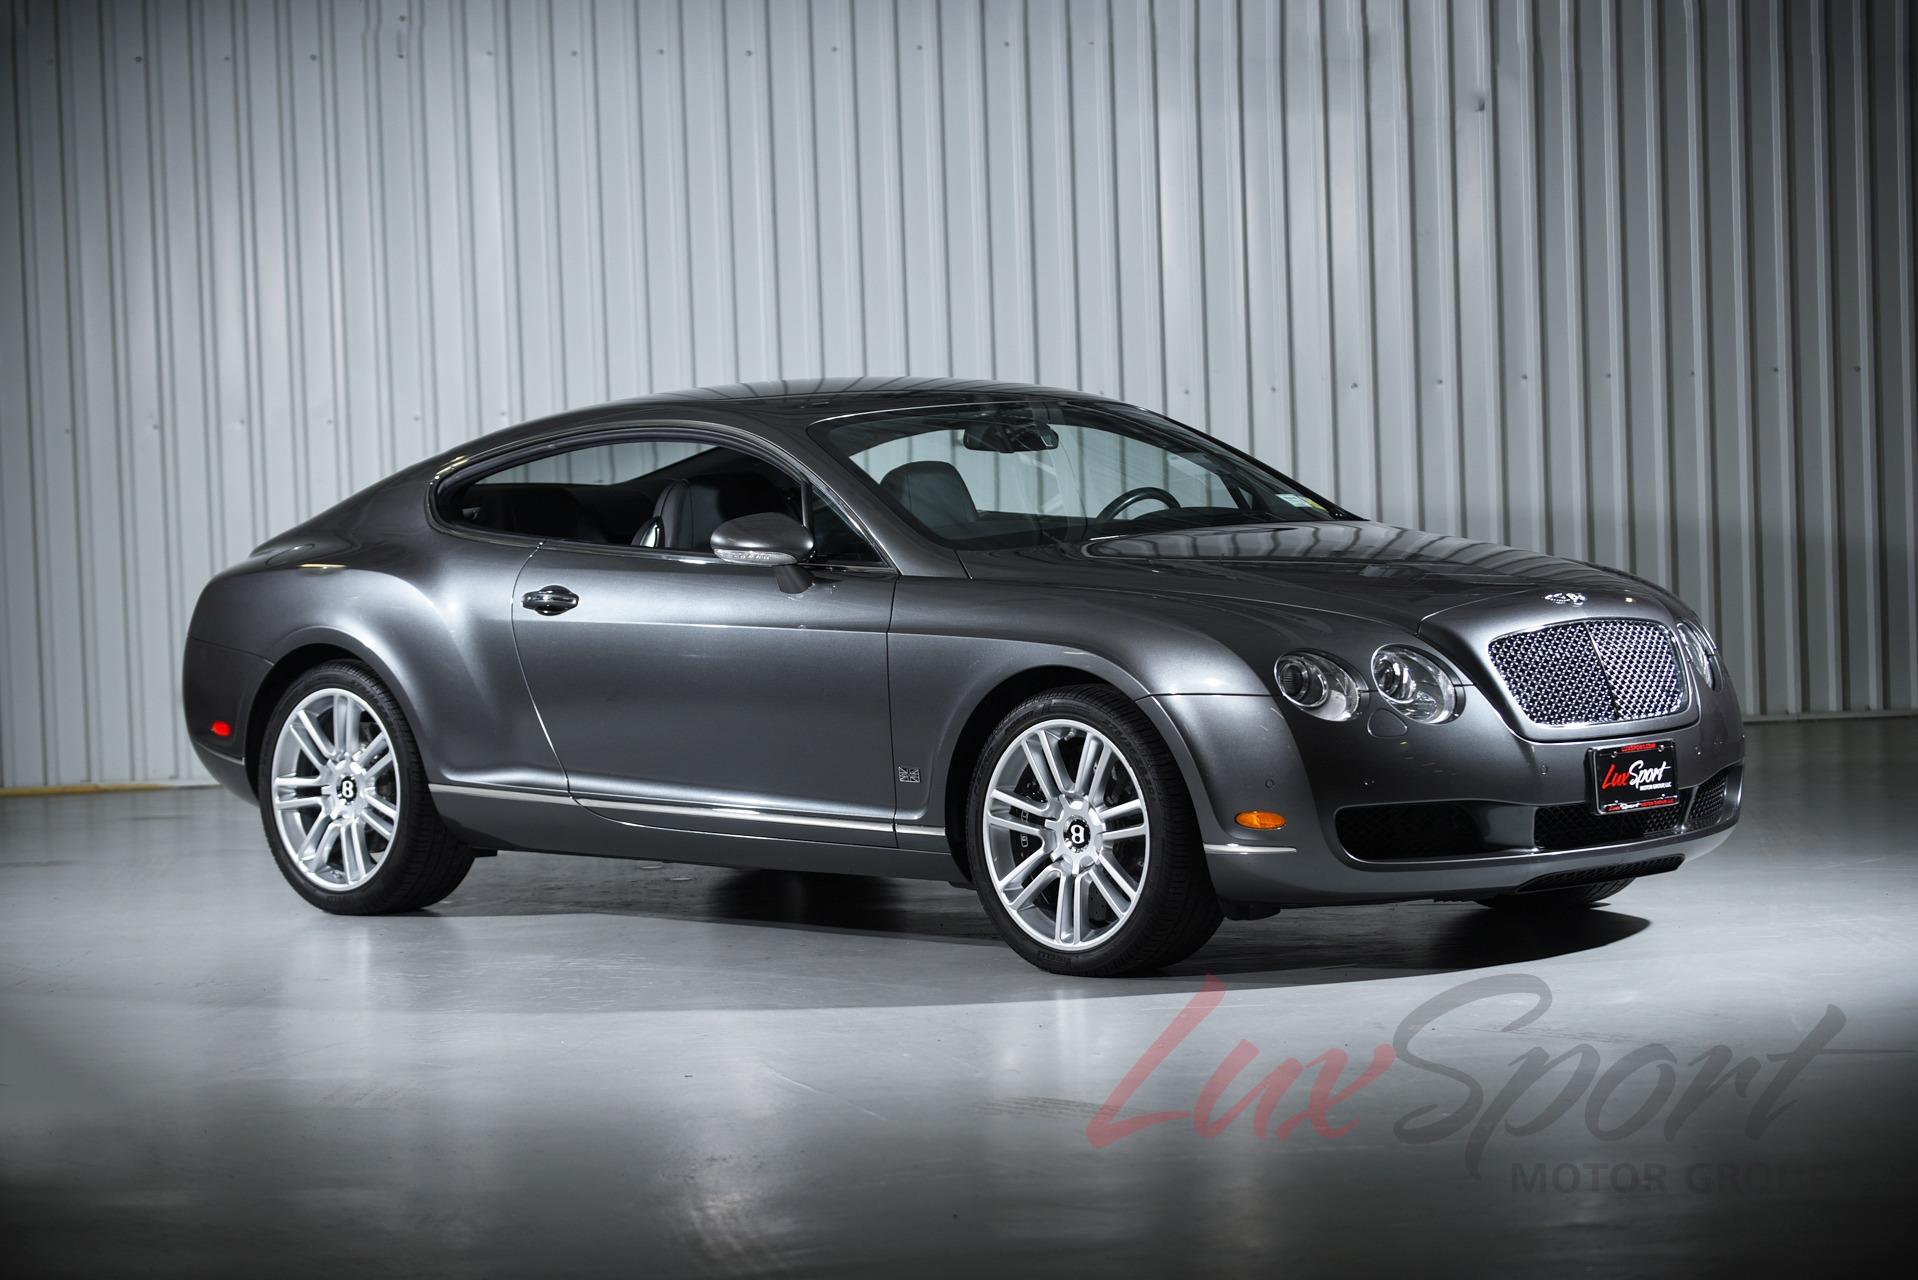 Power And Prestige: The 2007 Bentley Continental GT Speed